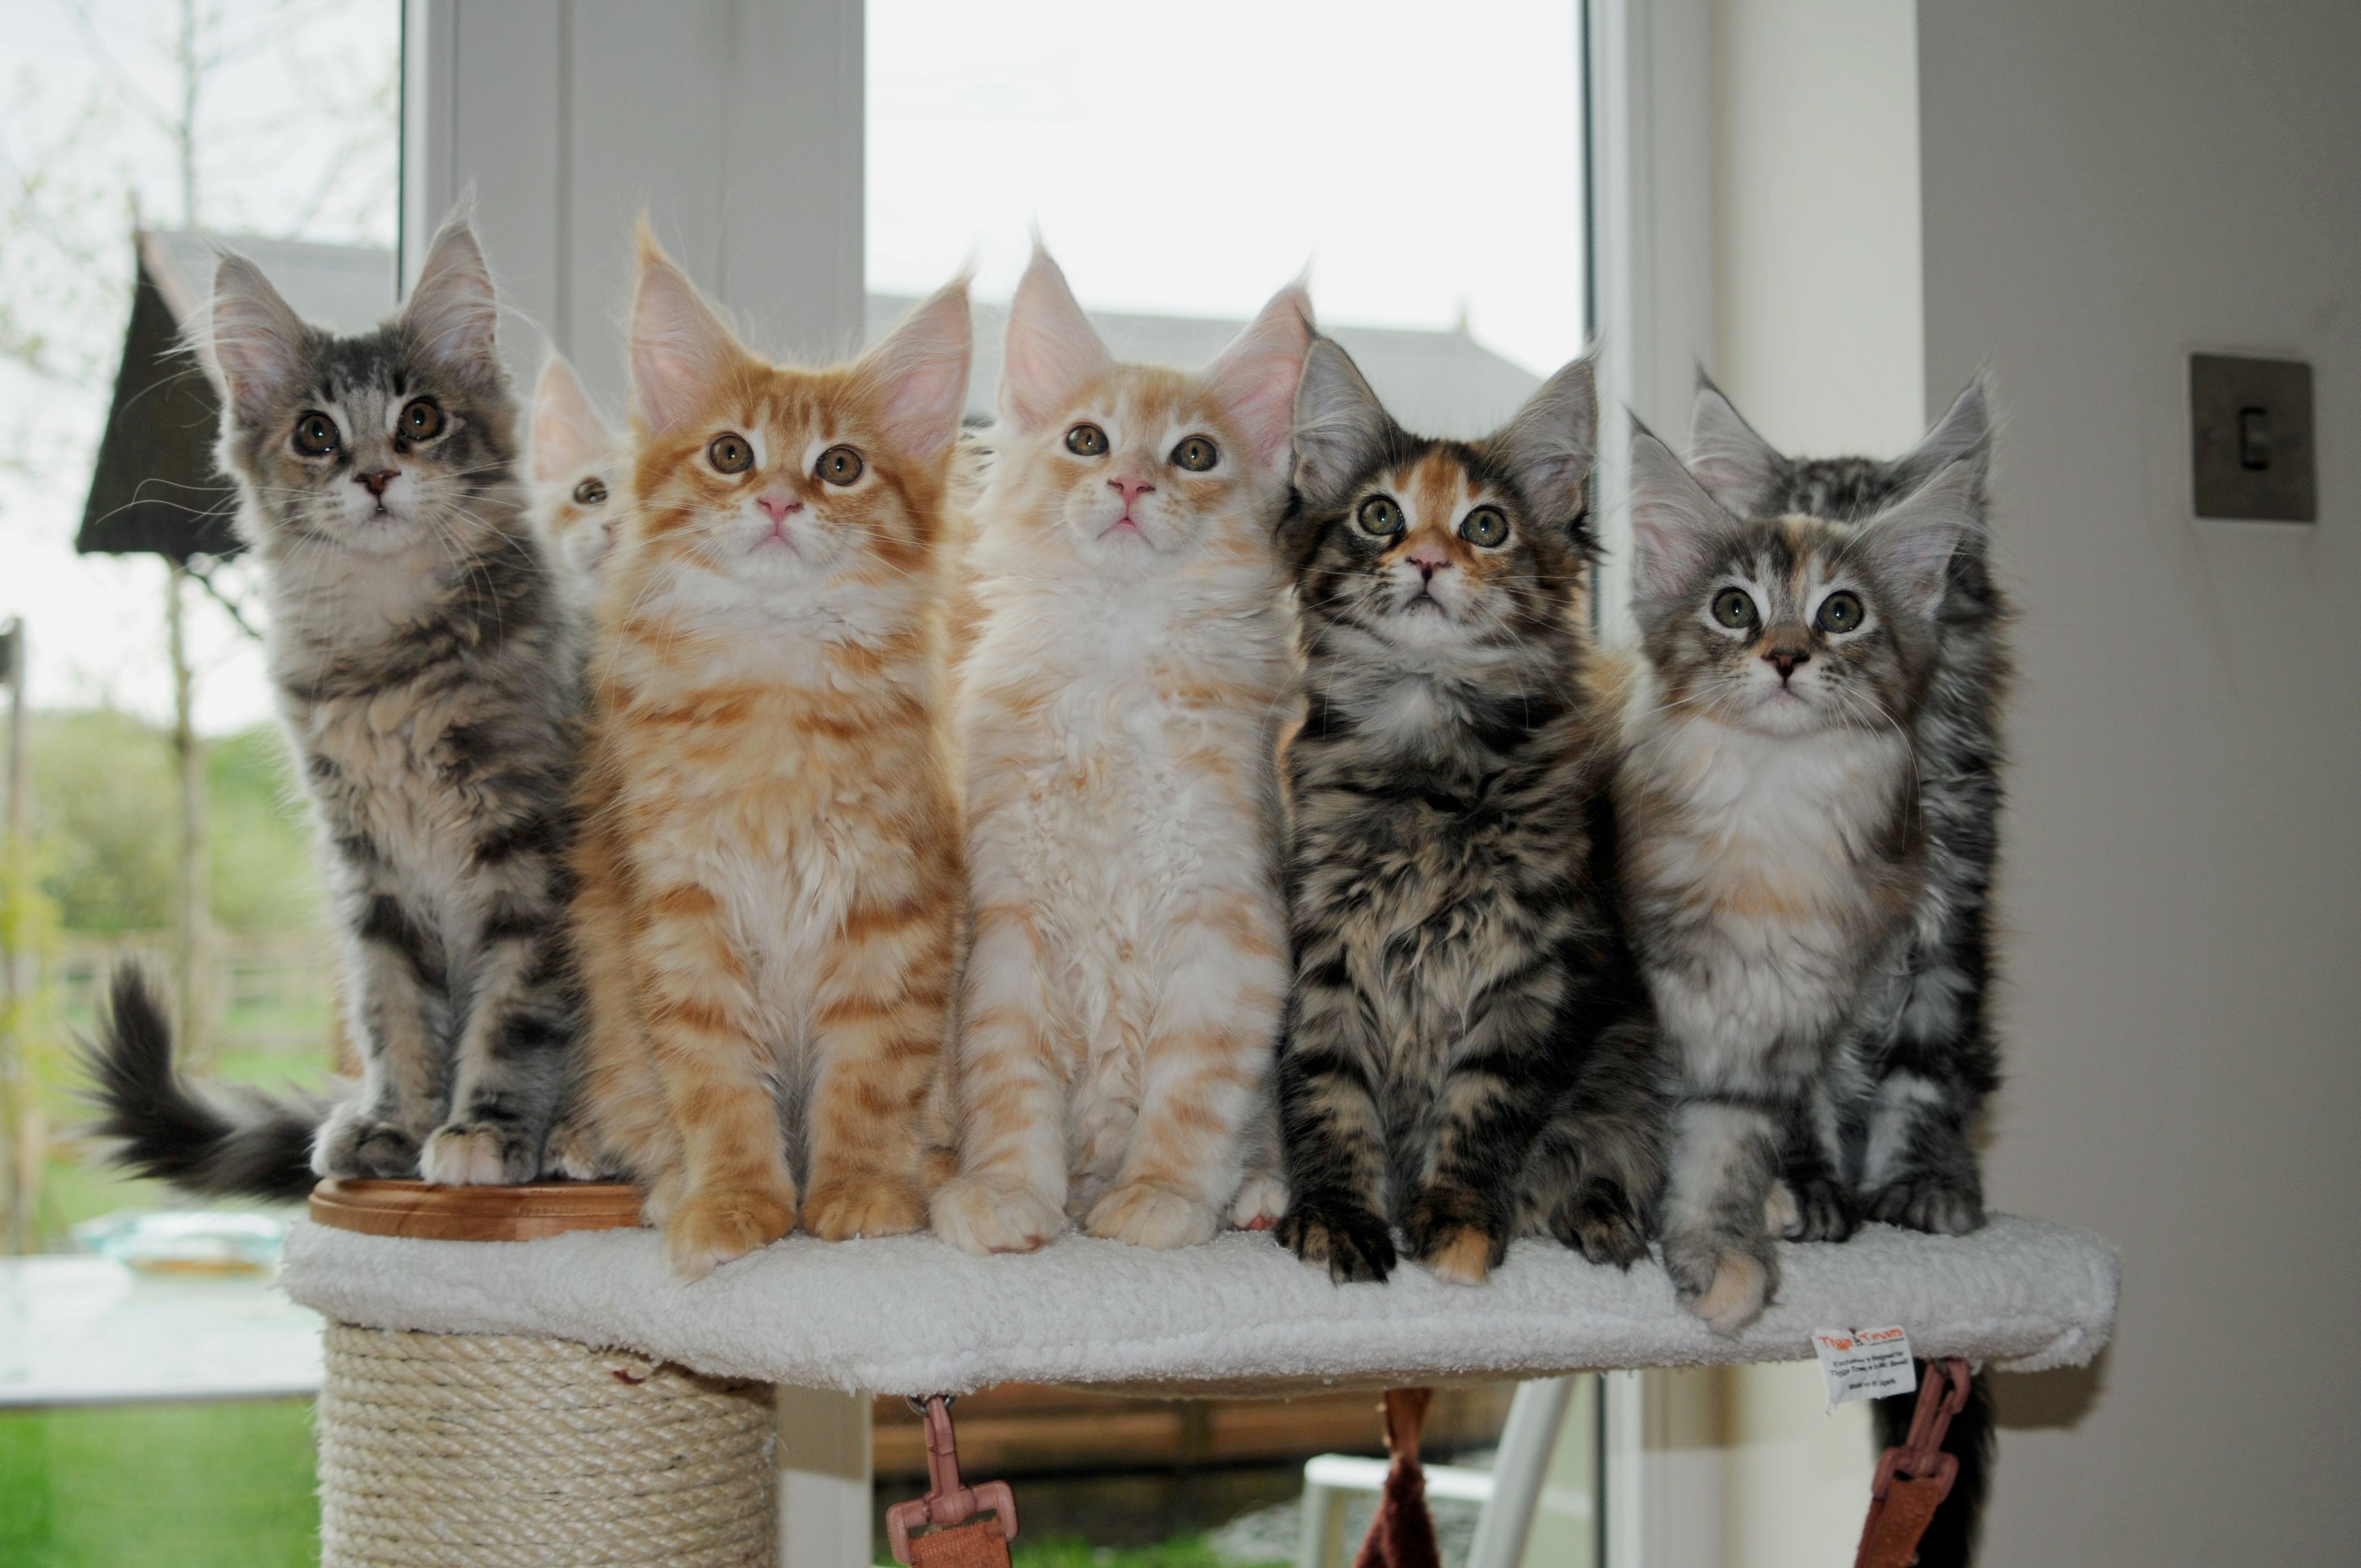 Kittens on a cat scratching tower